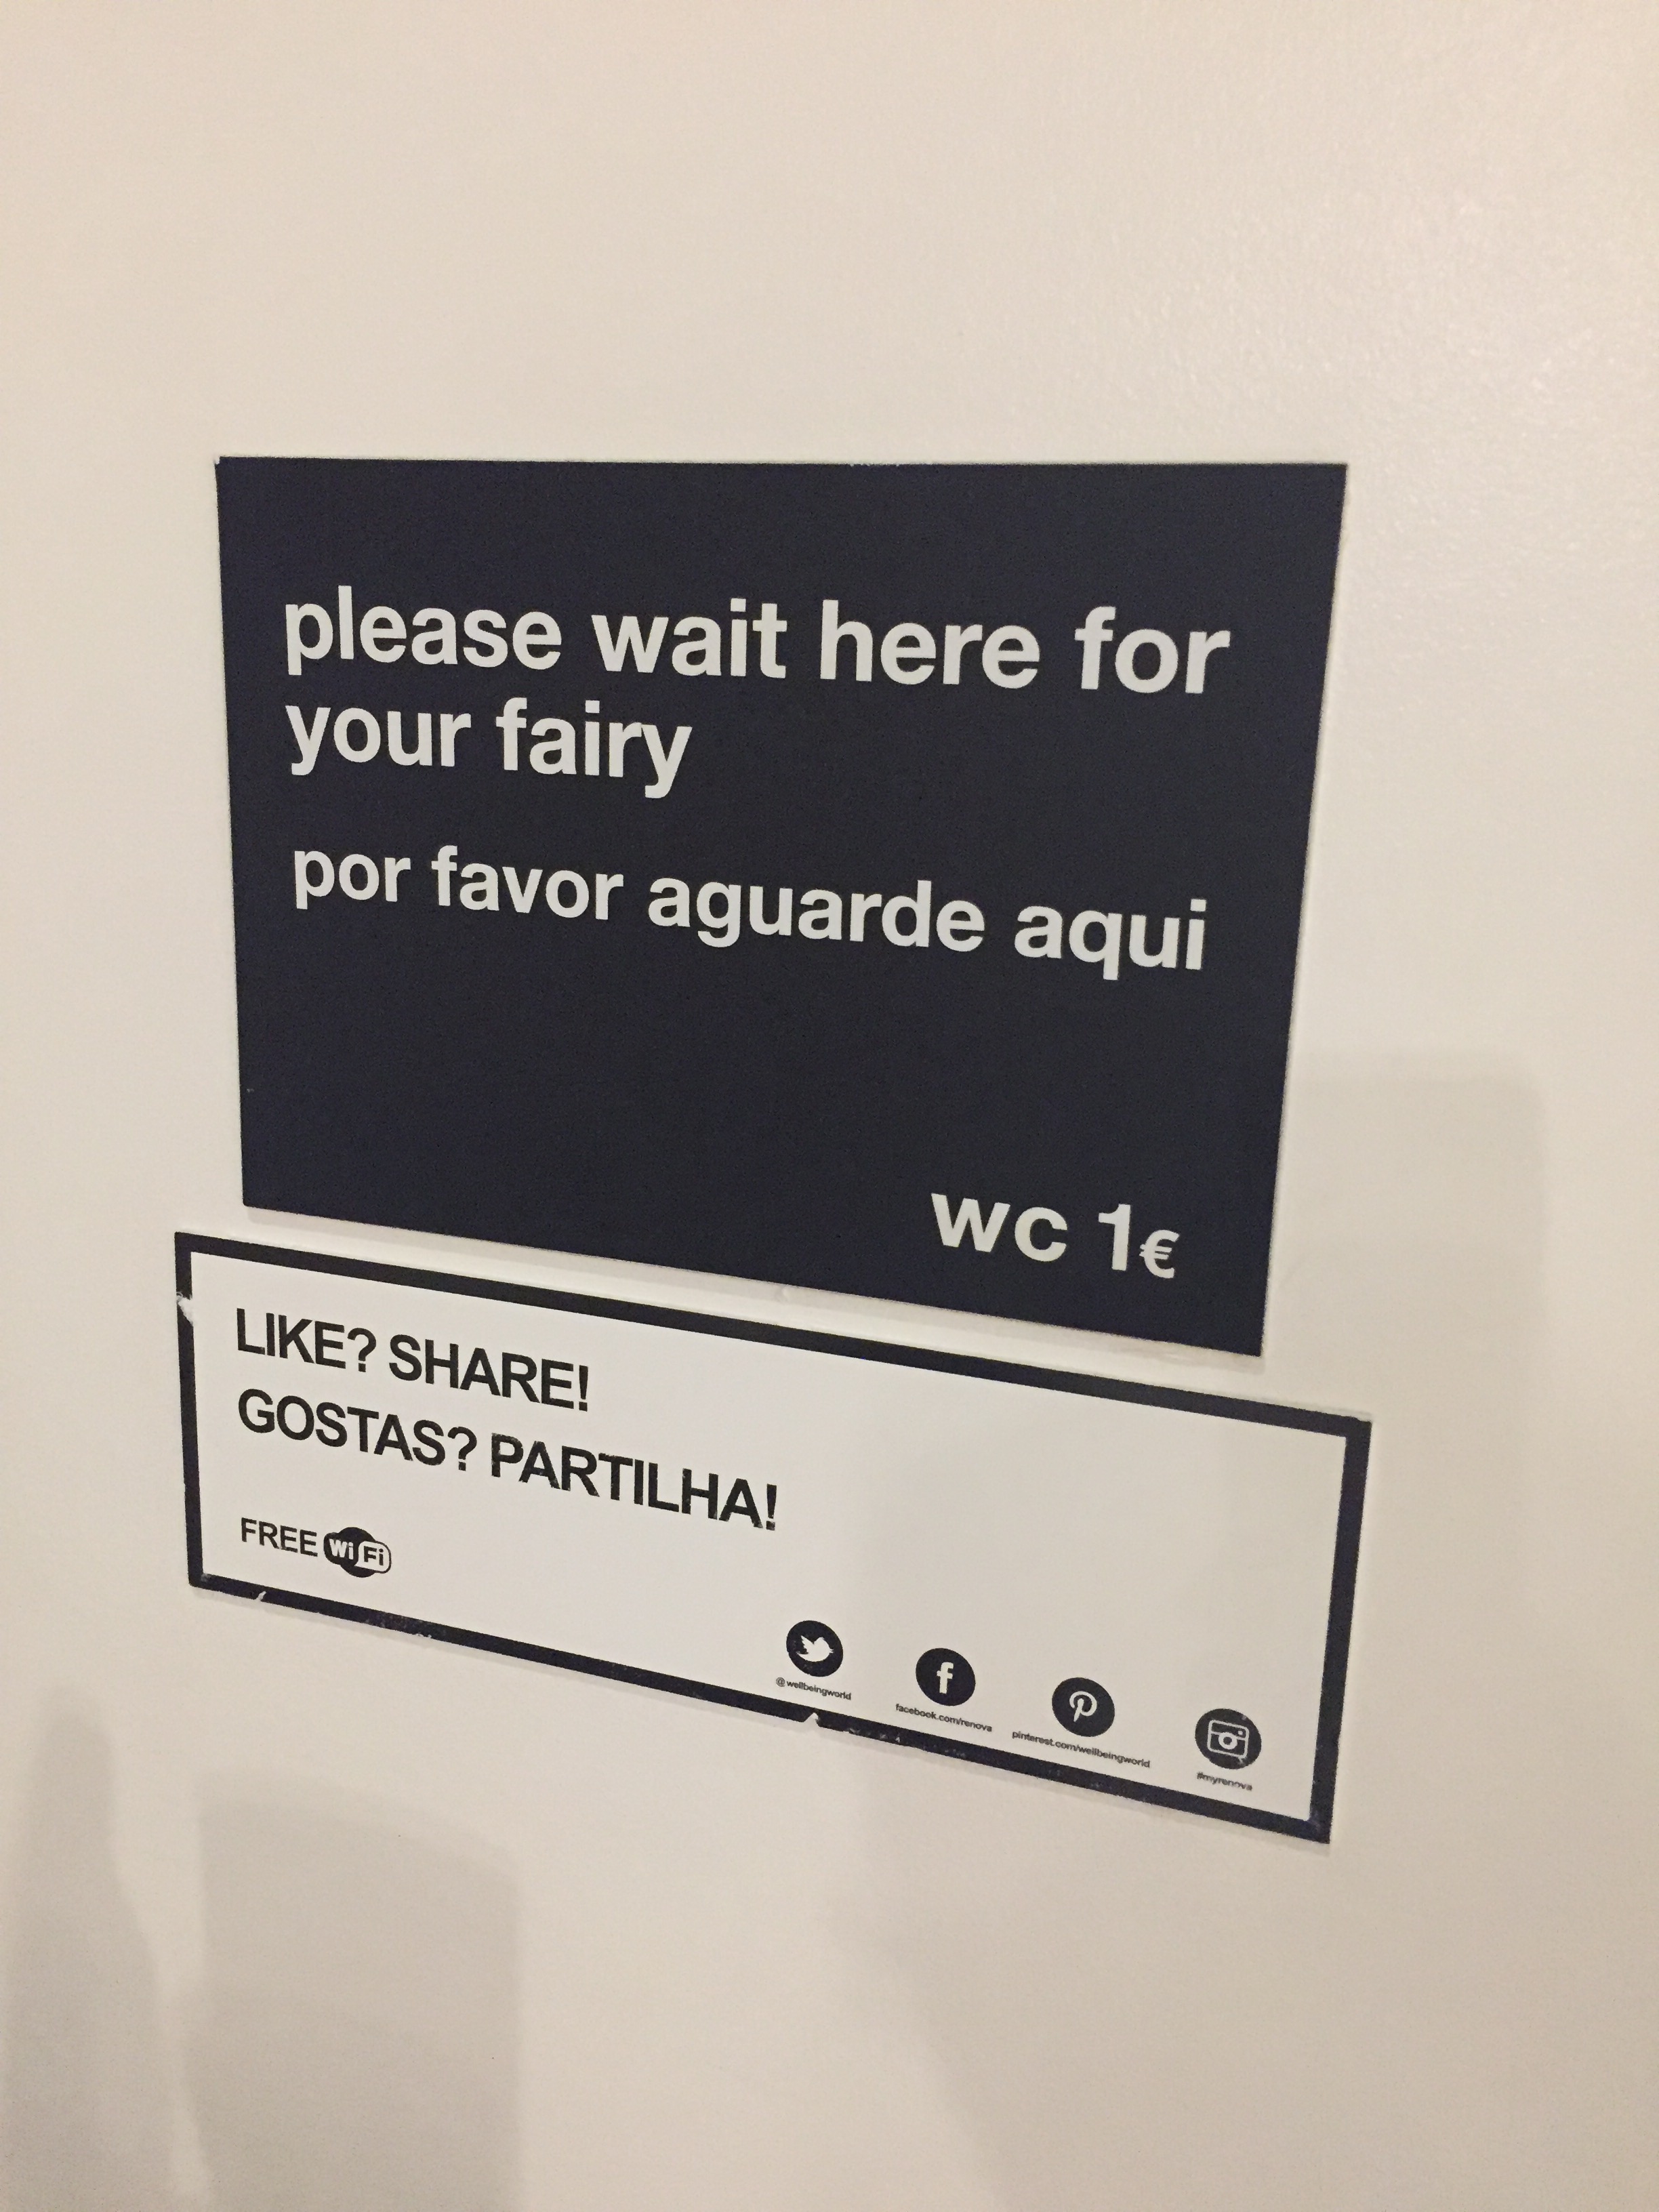 The sexiest WC on Earth in Lisbon